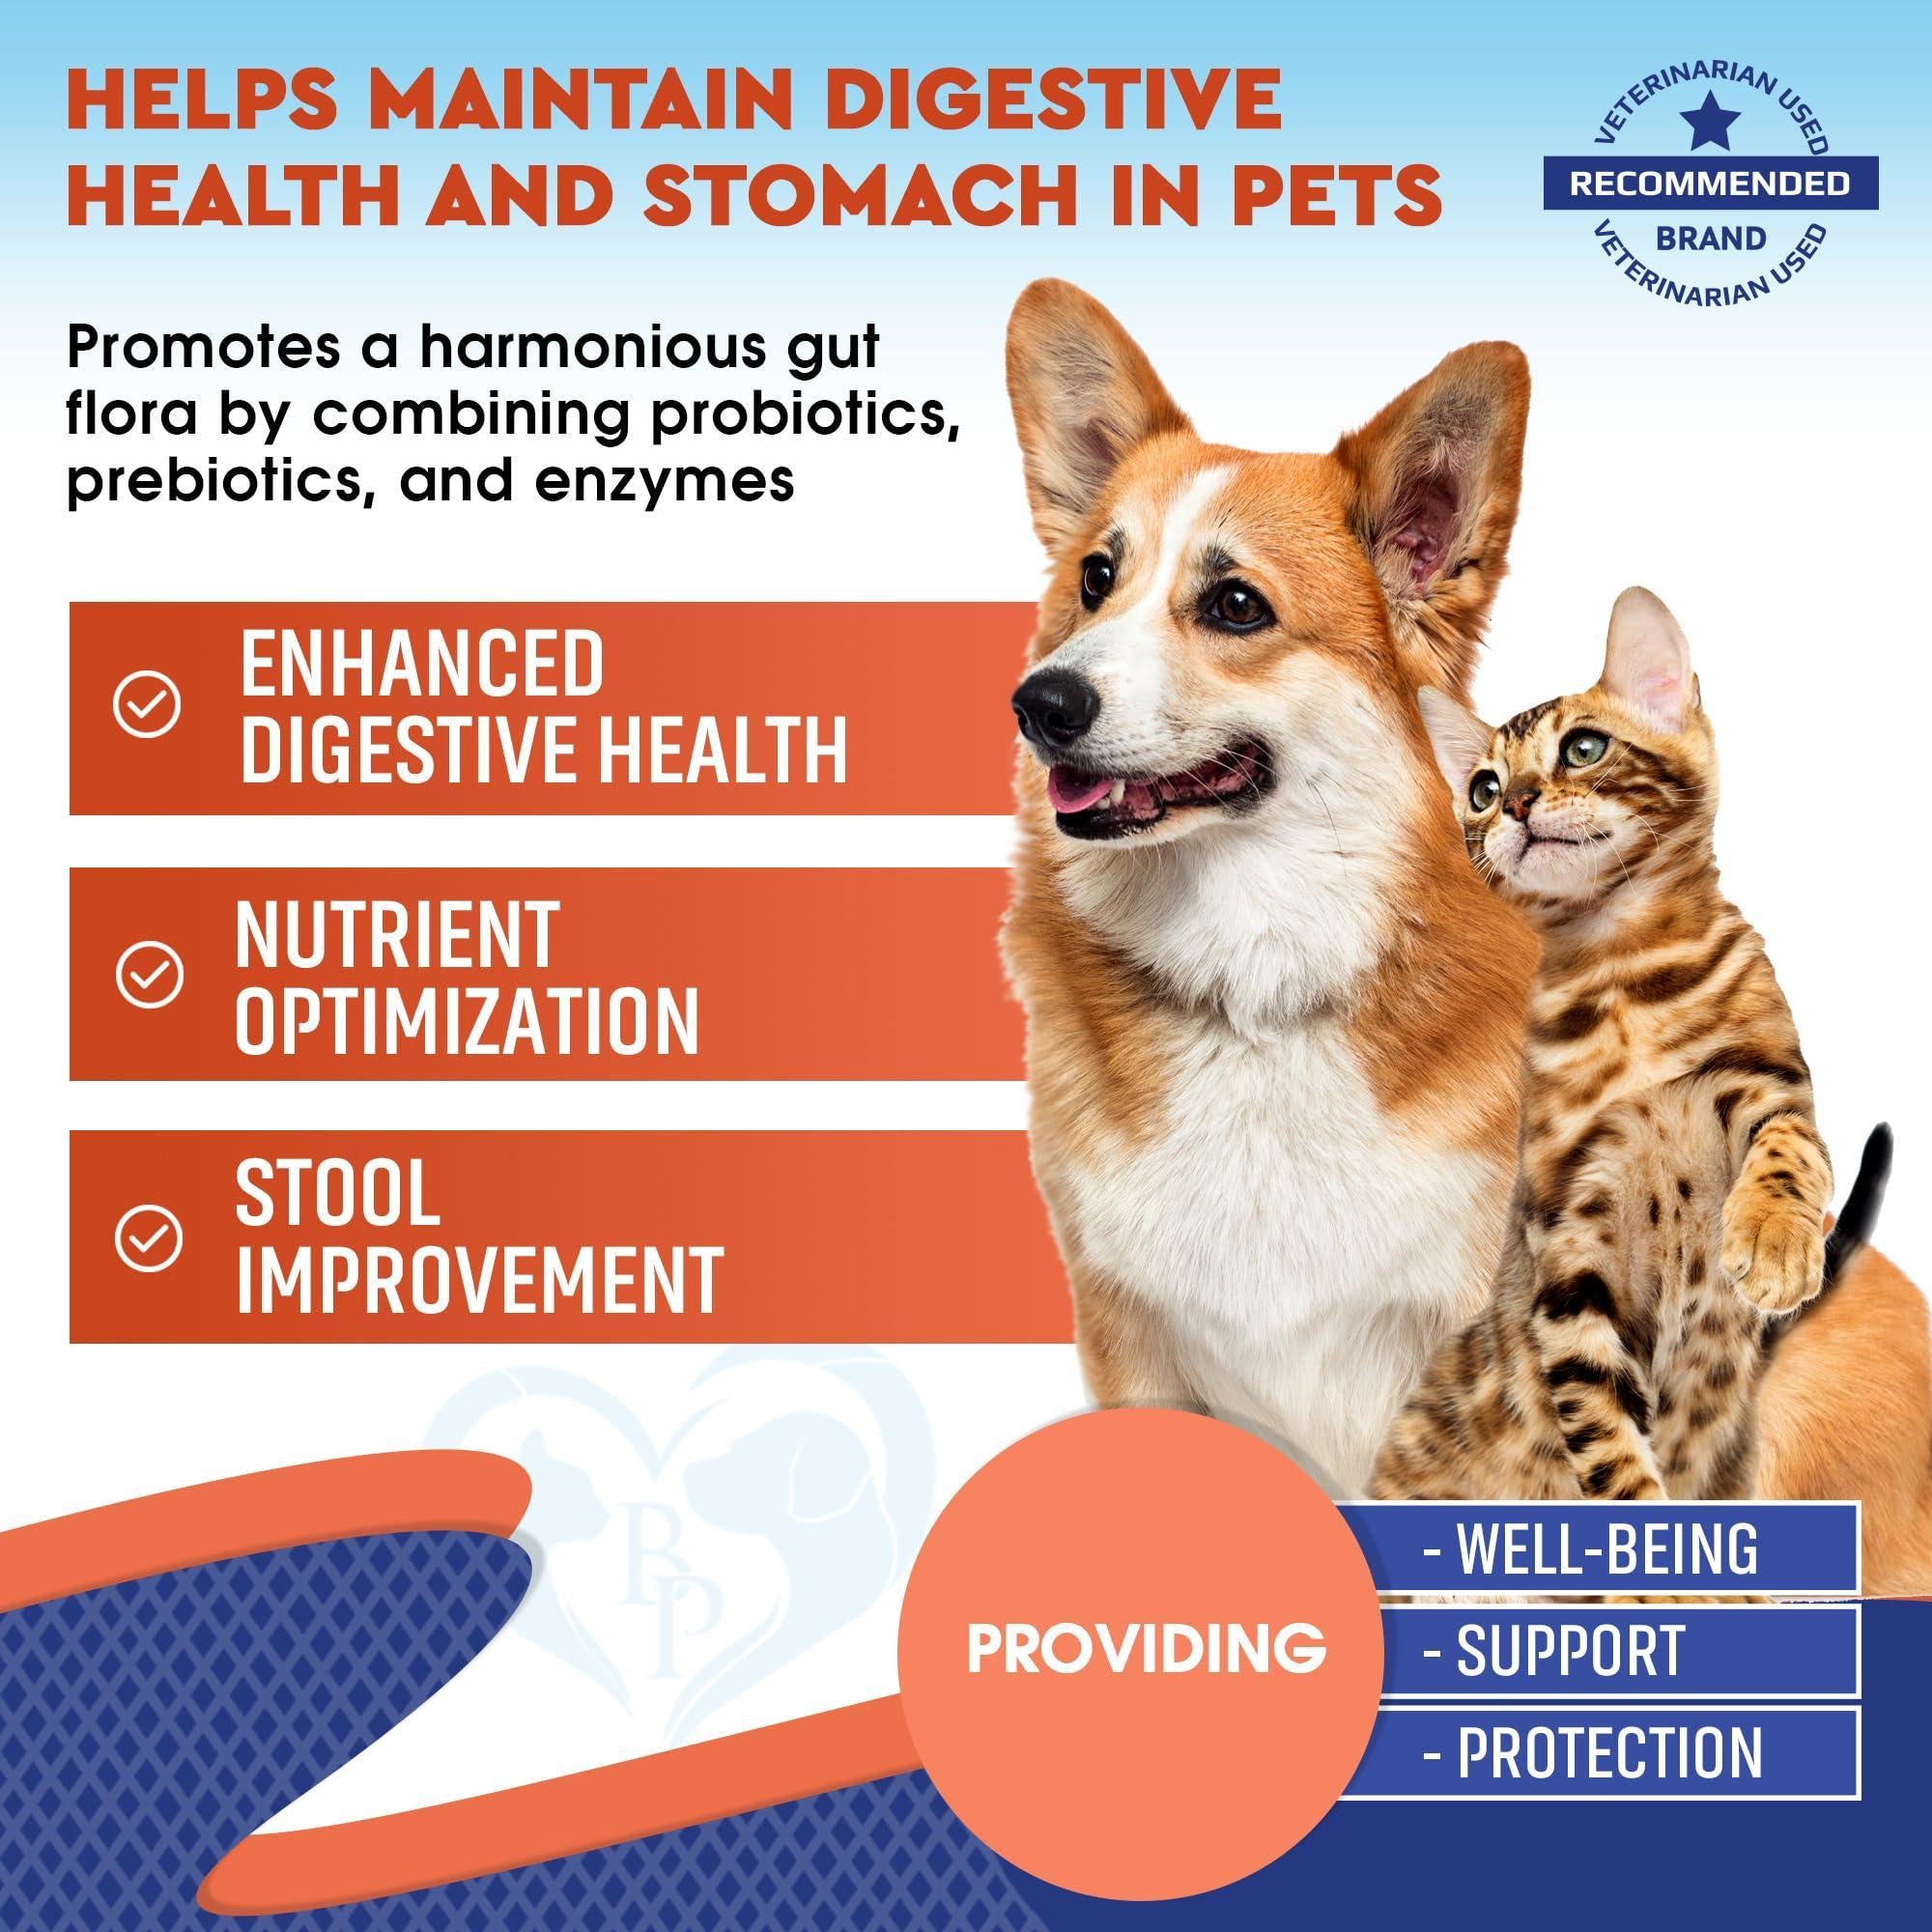 Probiotics & Prebiotics with Enzymes for Dogs and Cats   Digestive Gut Flora Health Pet Food Supplements   Constipation & Diarrhea and Gas Home Remedy   Upset Stomach Relief   Made in USA